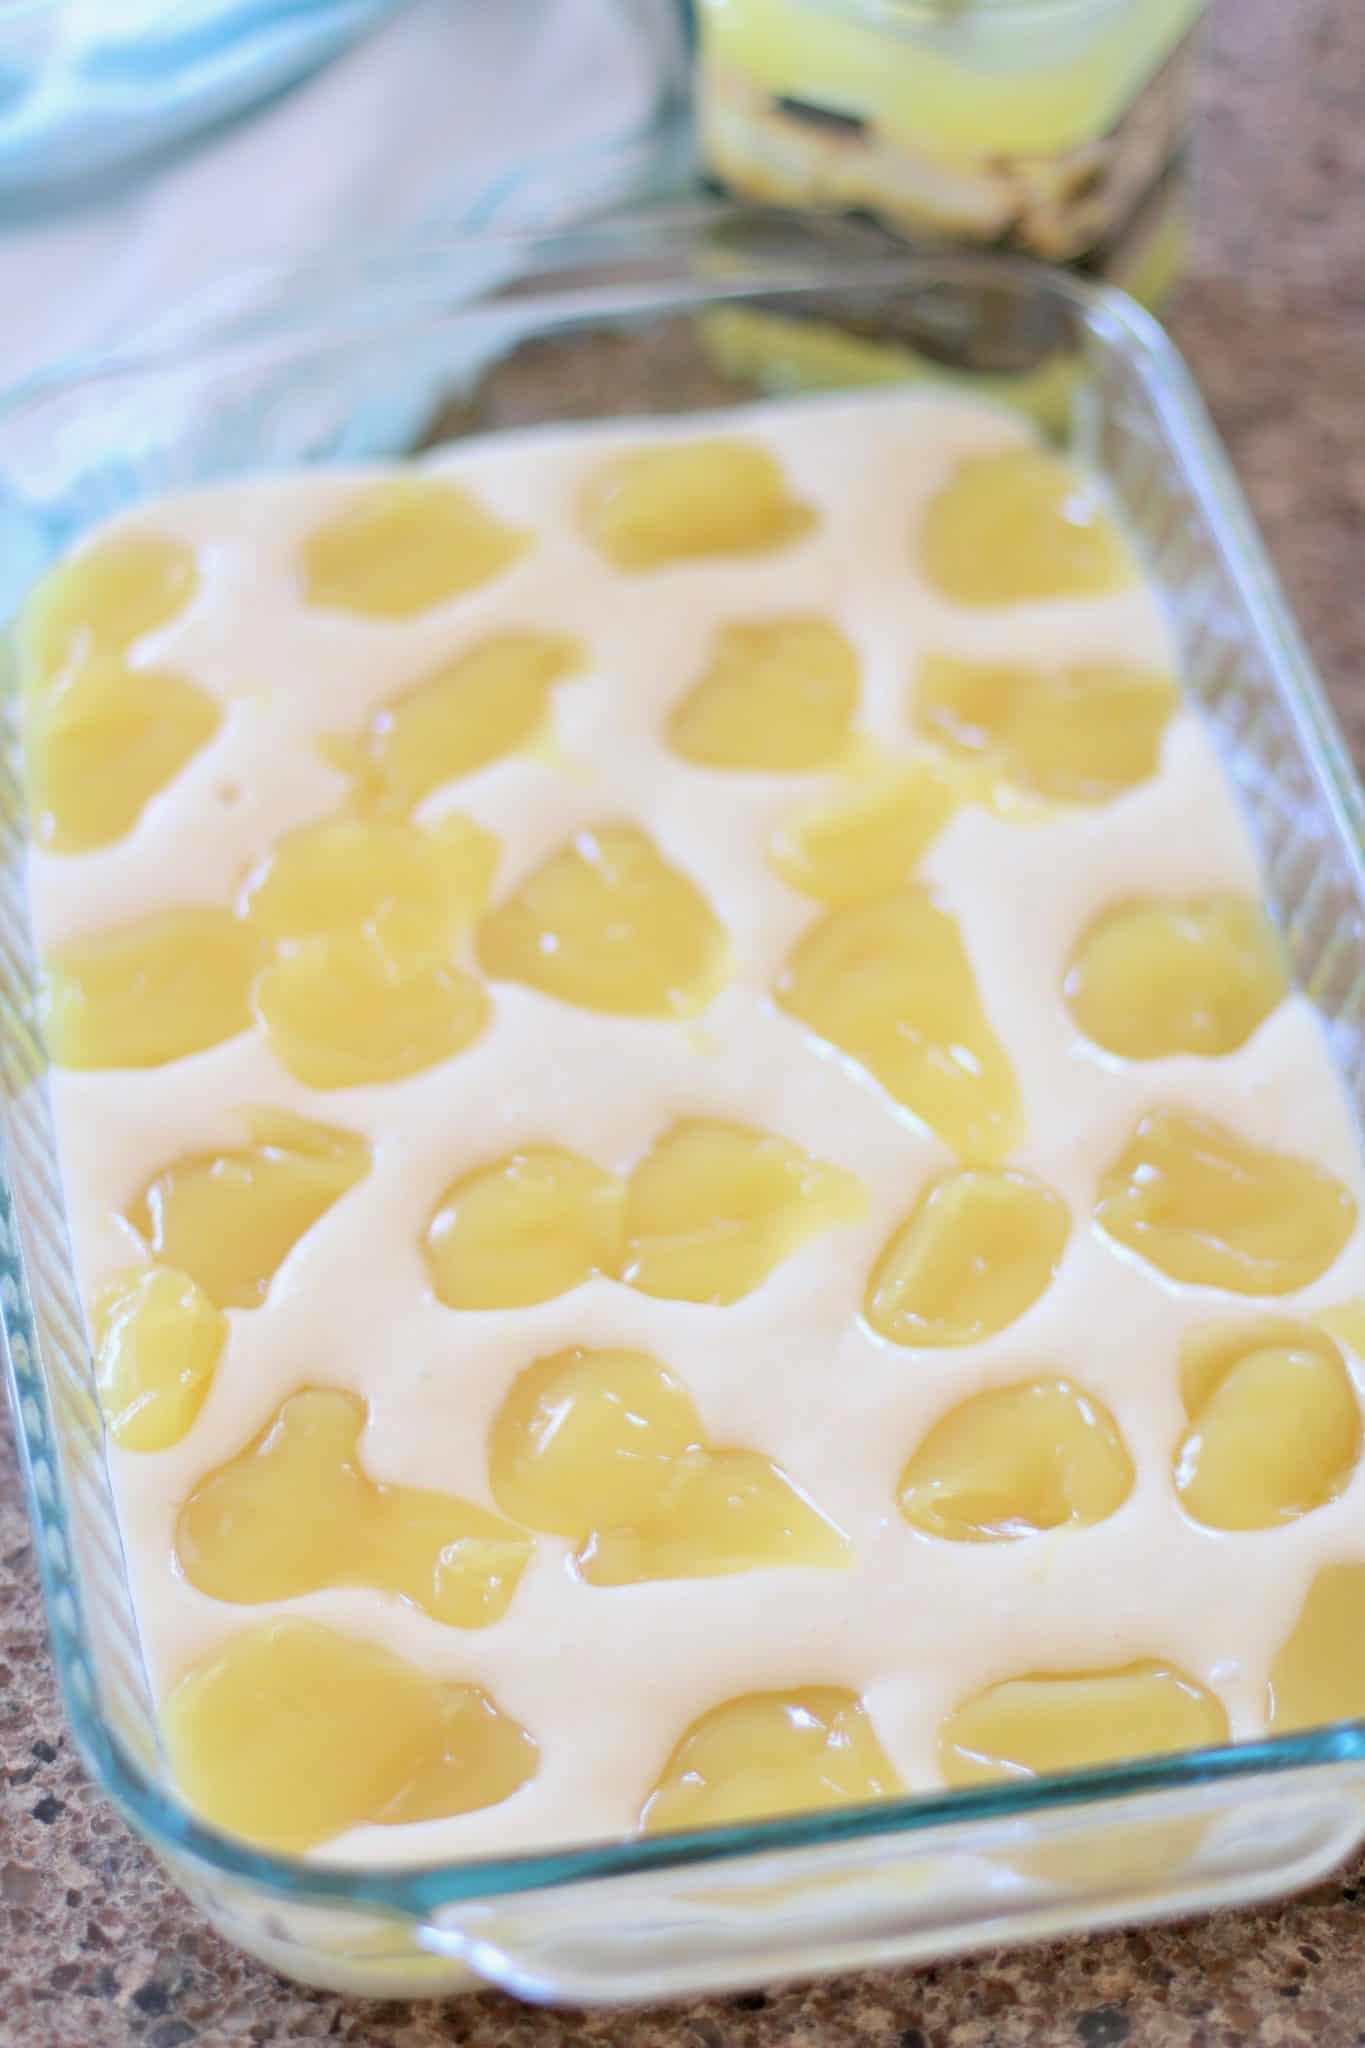 vanilla cake batter in a glass baking dish with pie filling dotted all over the cake batter.